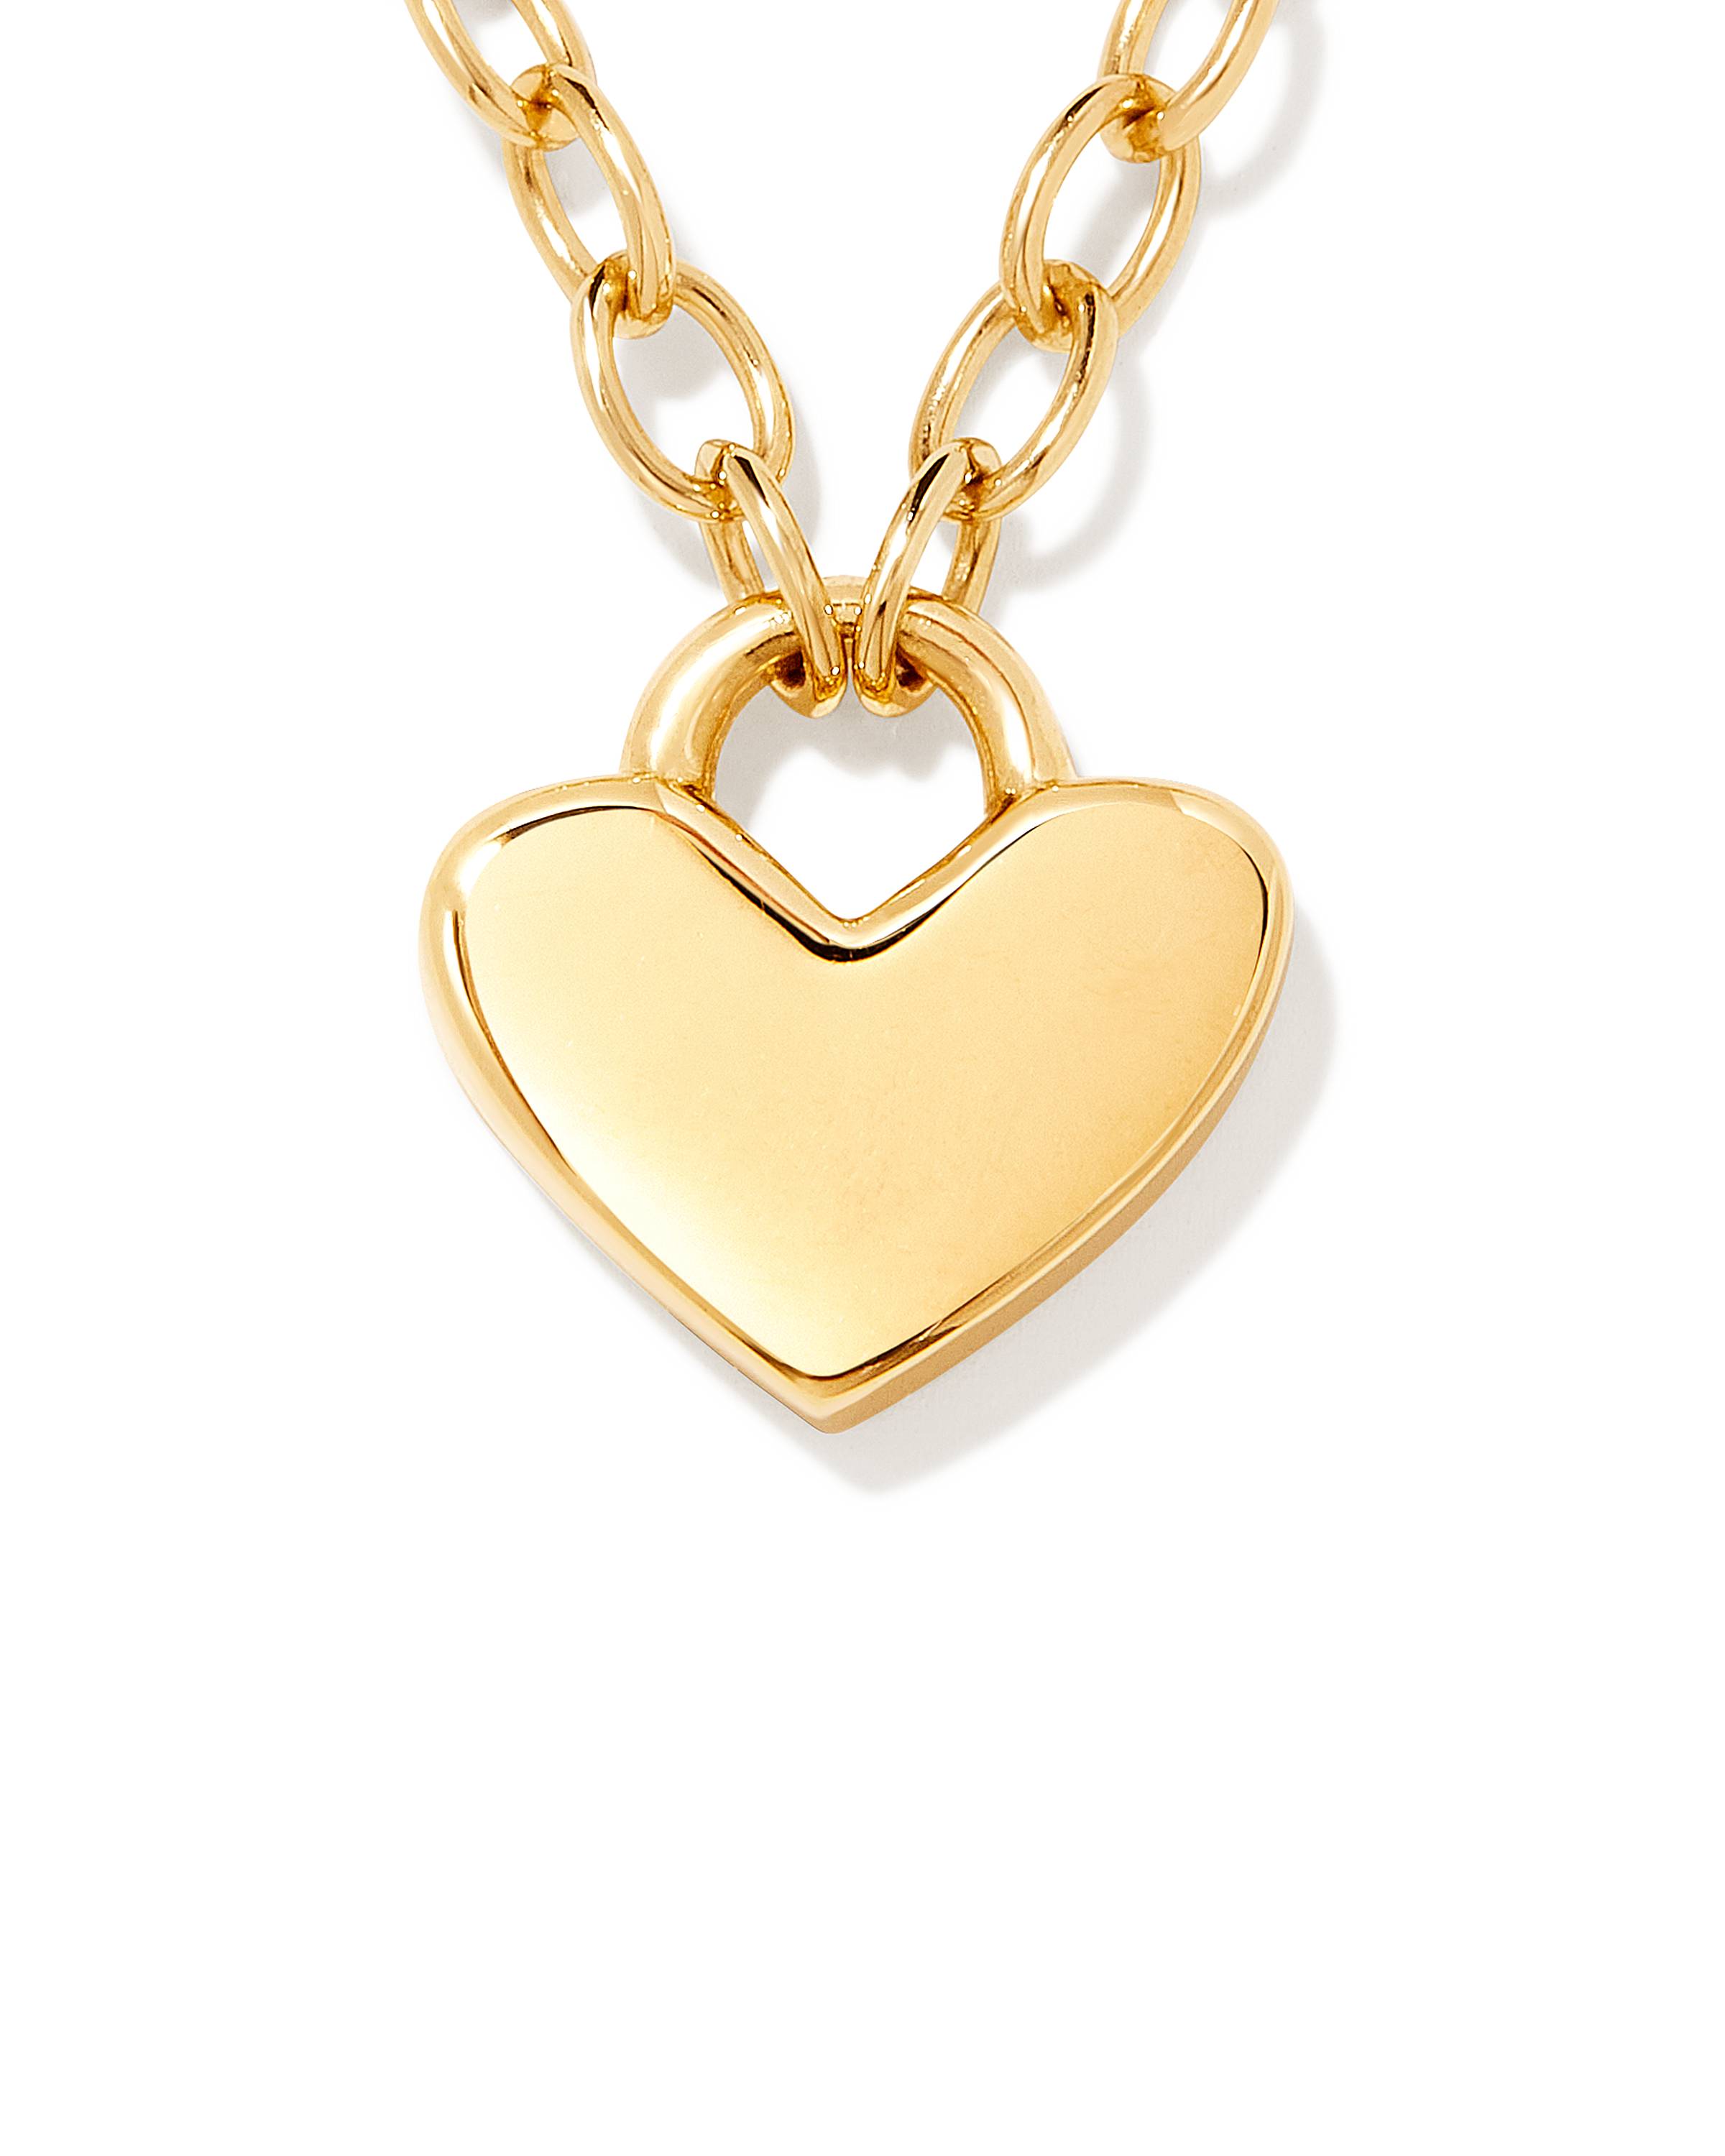 Heart Charm Lock Necklace - Gold Vermeil - Gift for Valentine's Day - Initial Necklace - Heart Charm - Pedlock Necklace